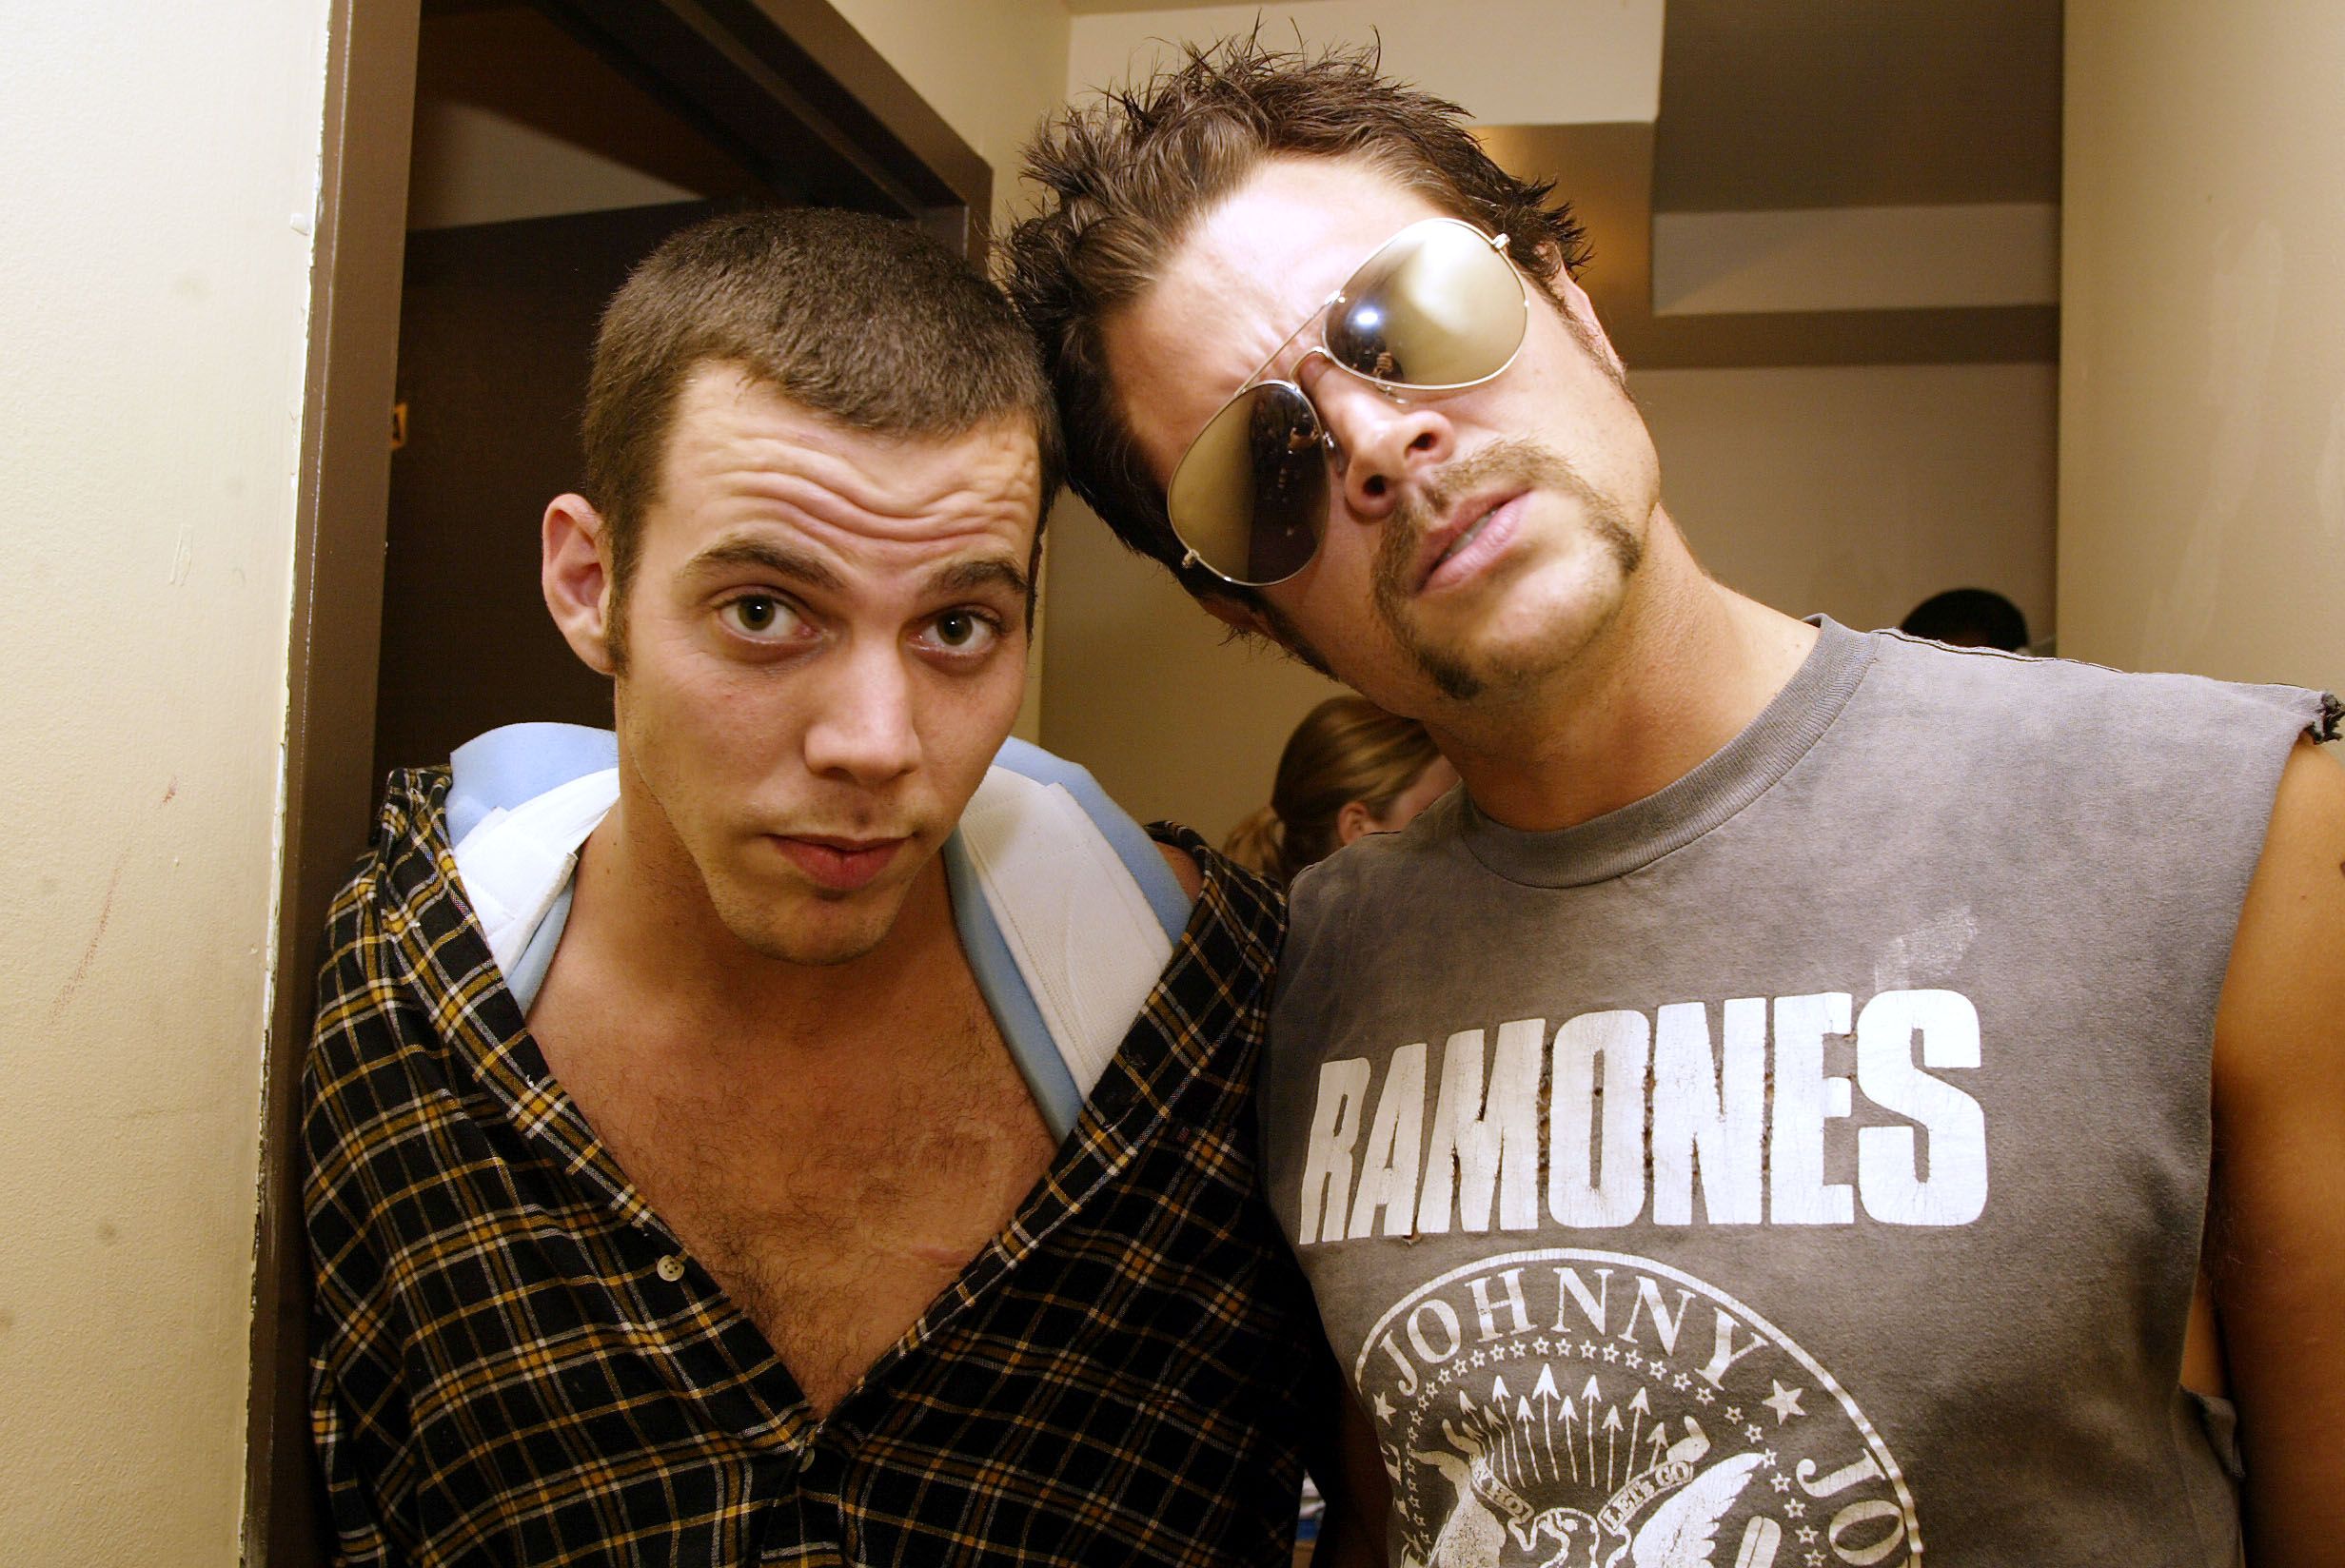 johnny knoxville 2001